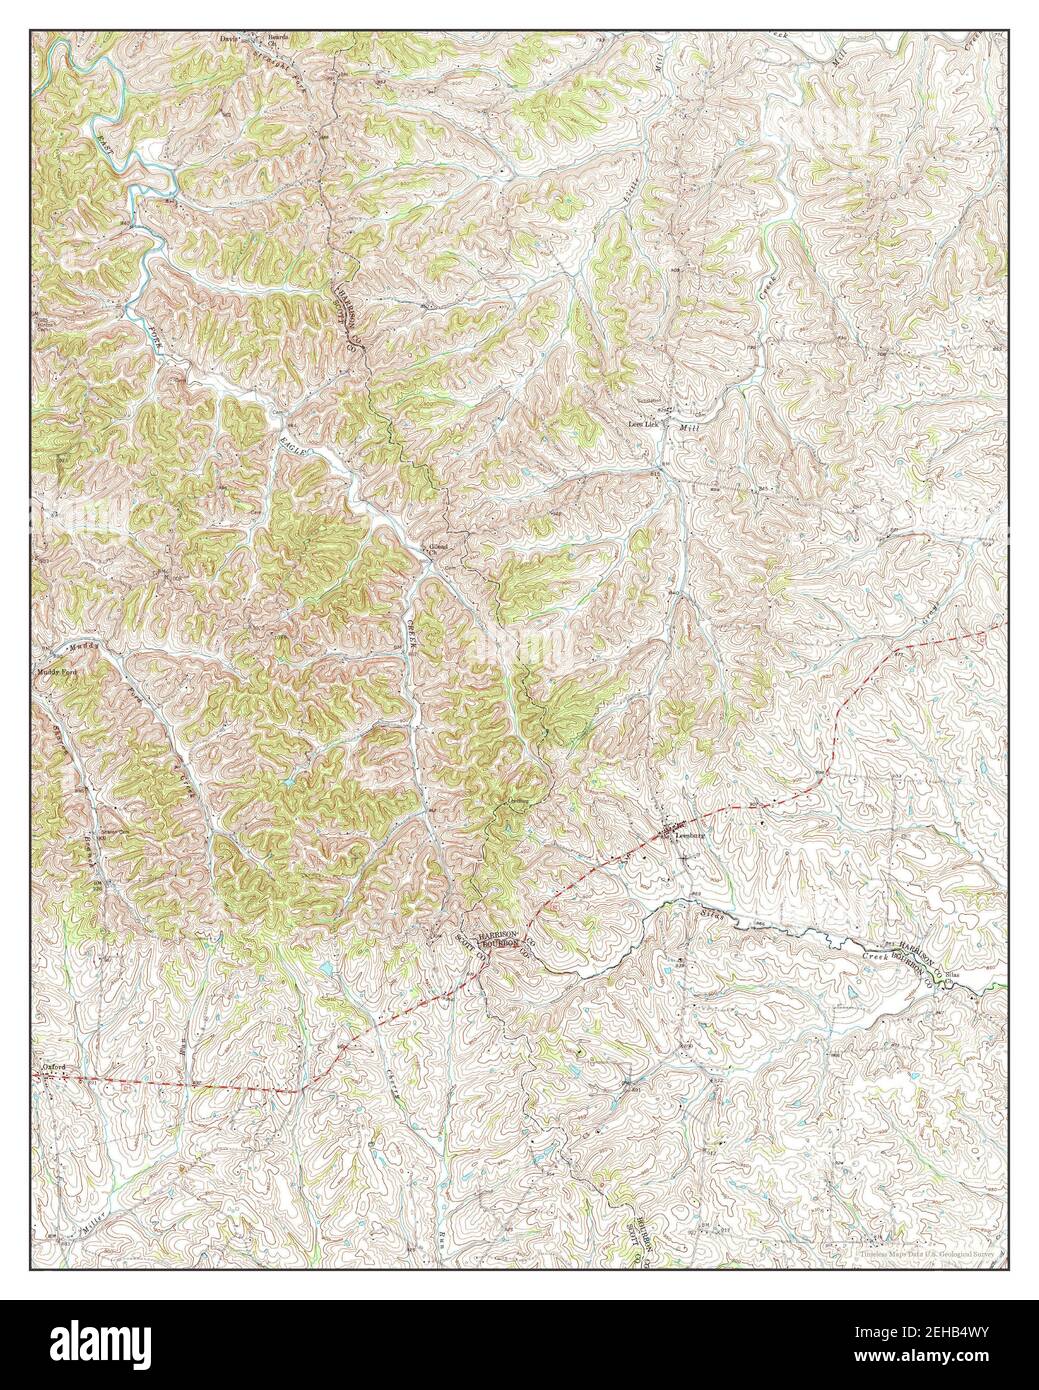 Leesburg, Kentucky, map 1954, 1:24000, United States of America by Timeless Maps, data U.S. Geological Survey Stock Photo